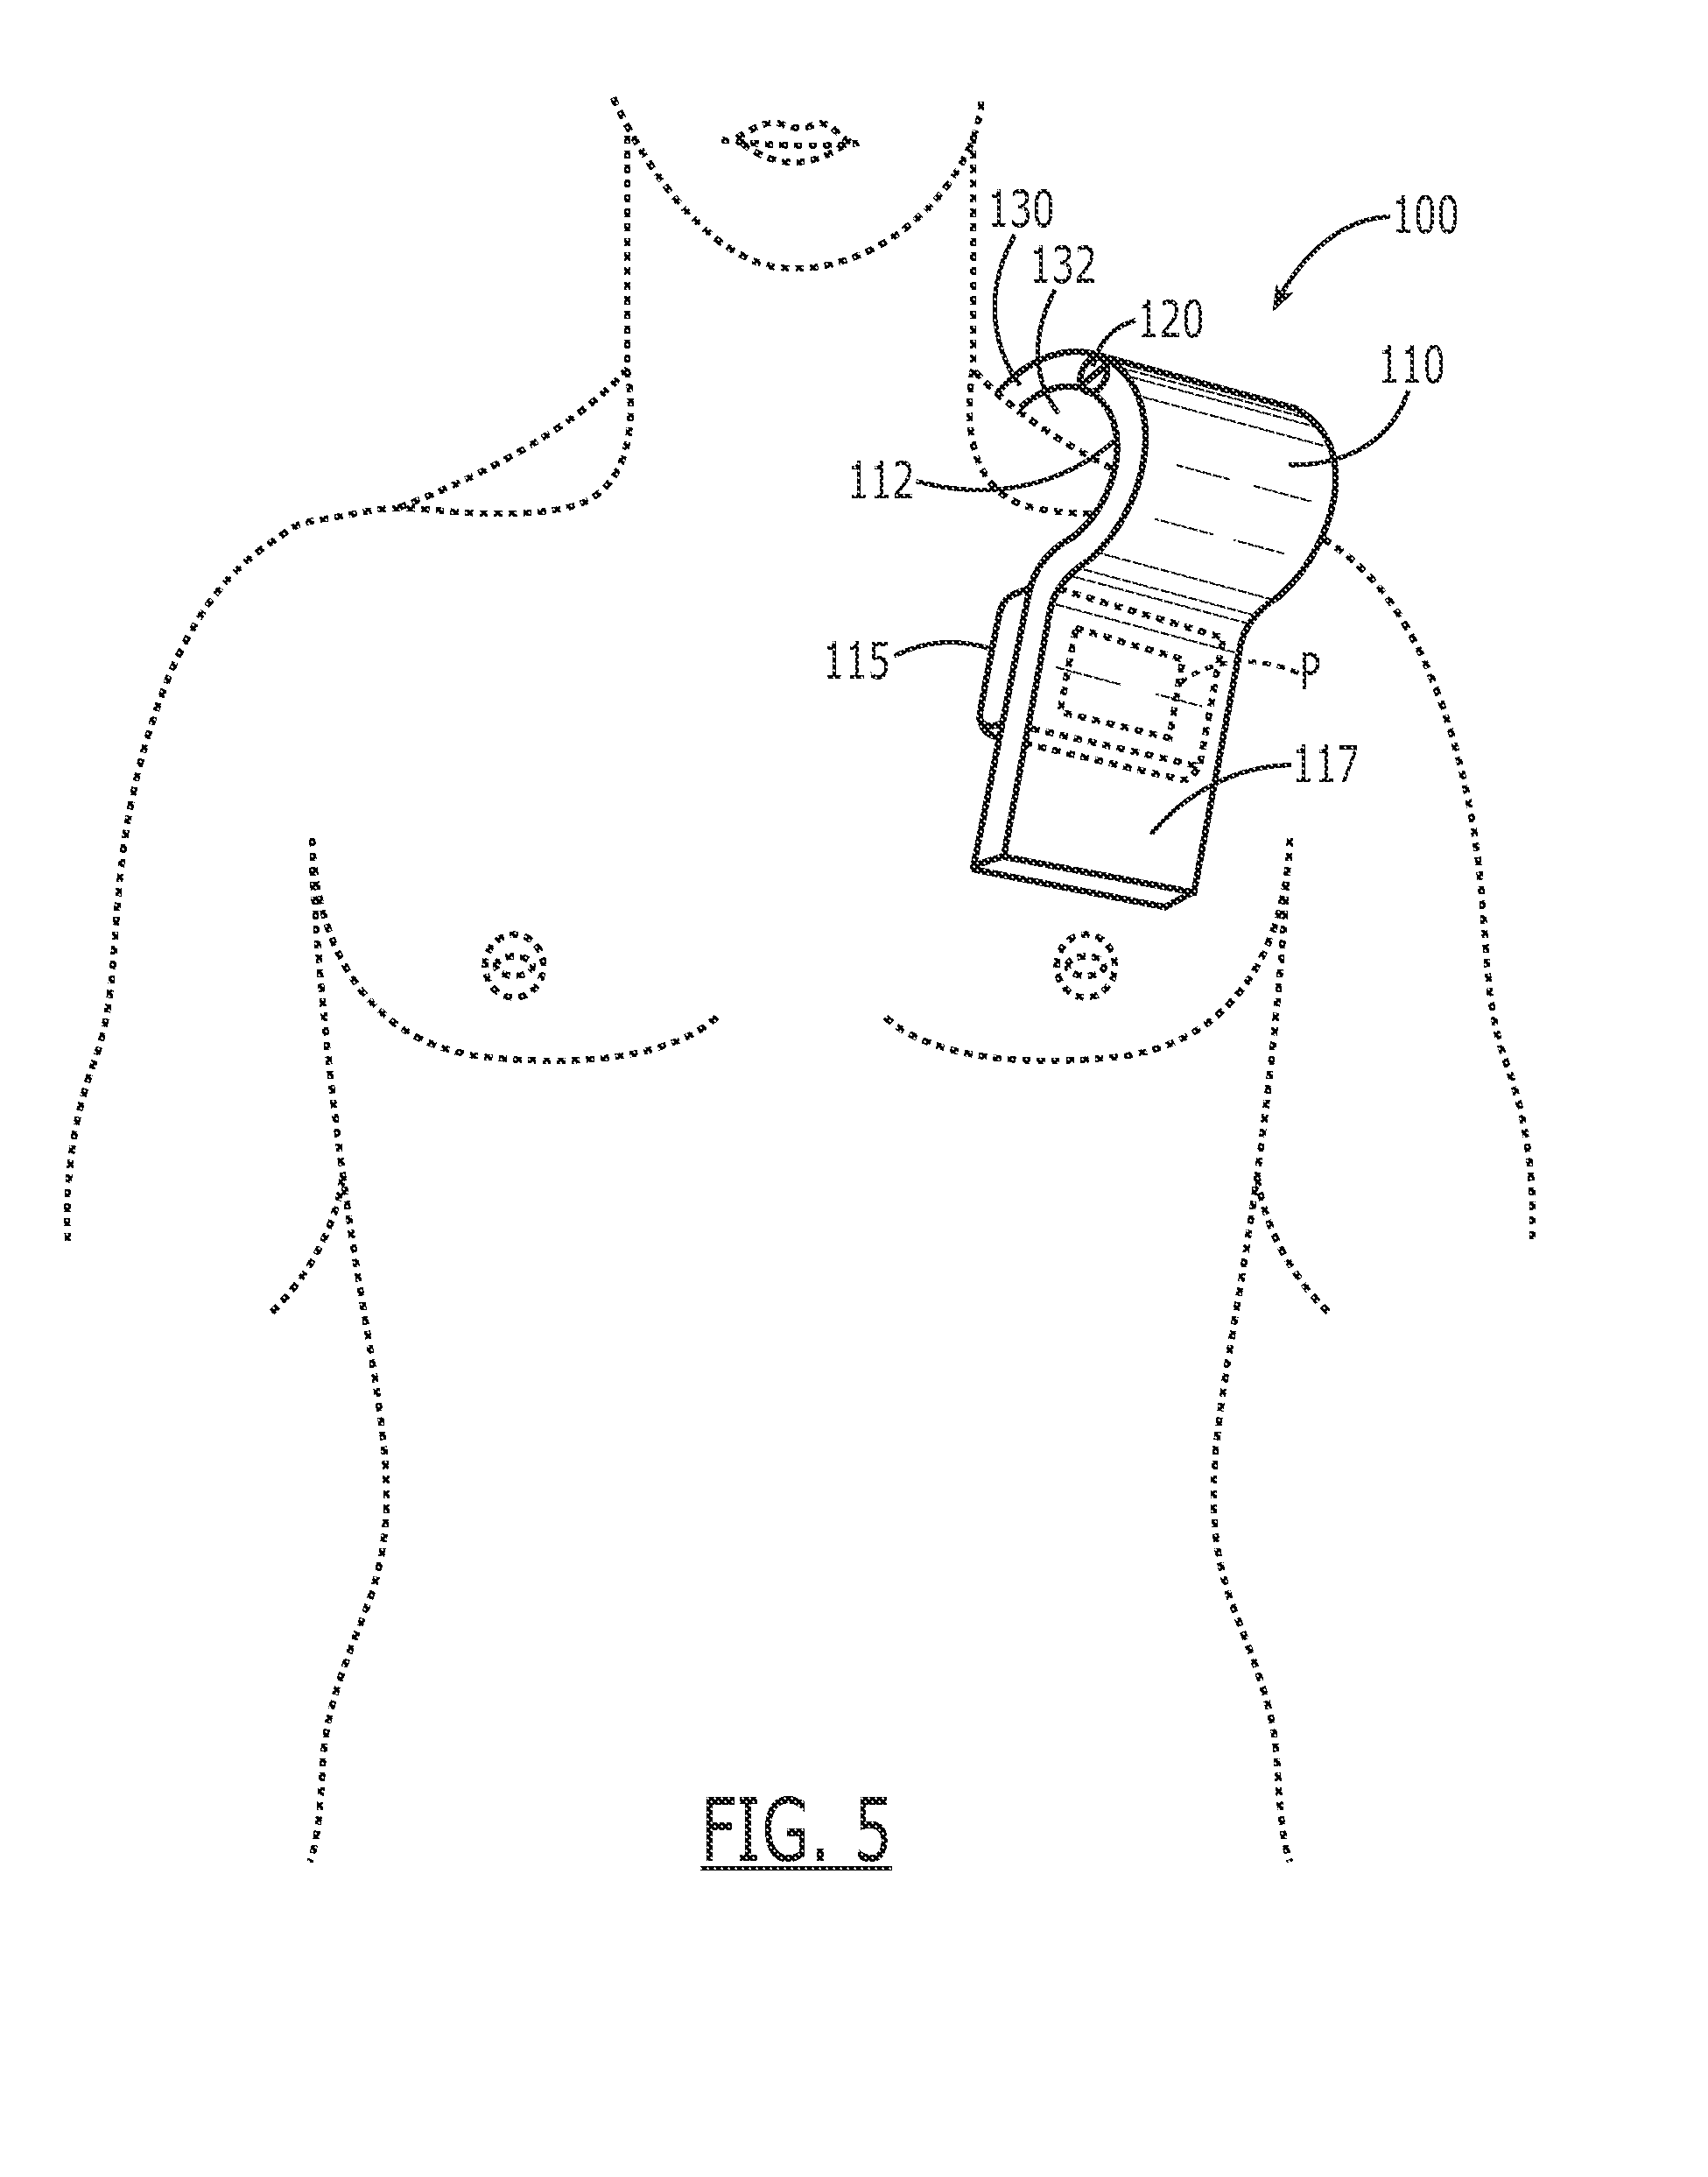 Device for applying pressure to a pocket to prevent hematoma after surgical implantation of medical device and method of using the same